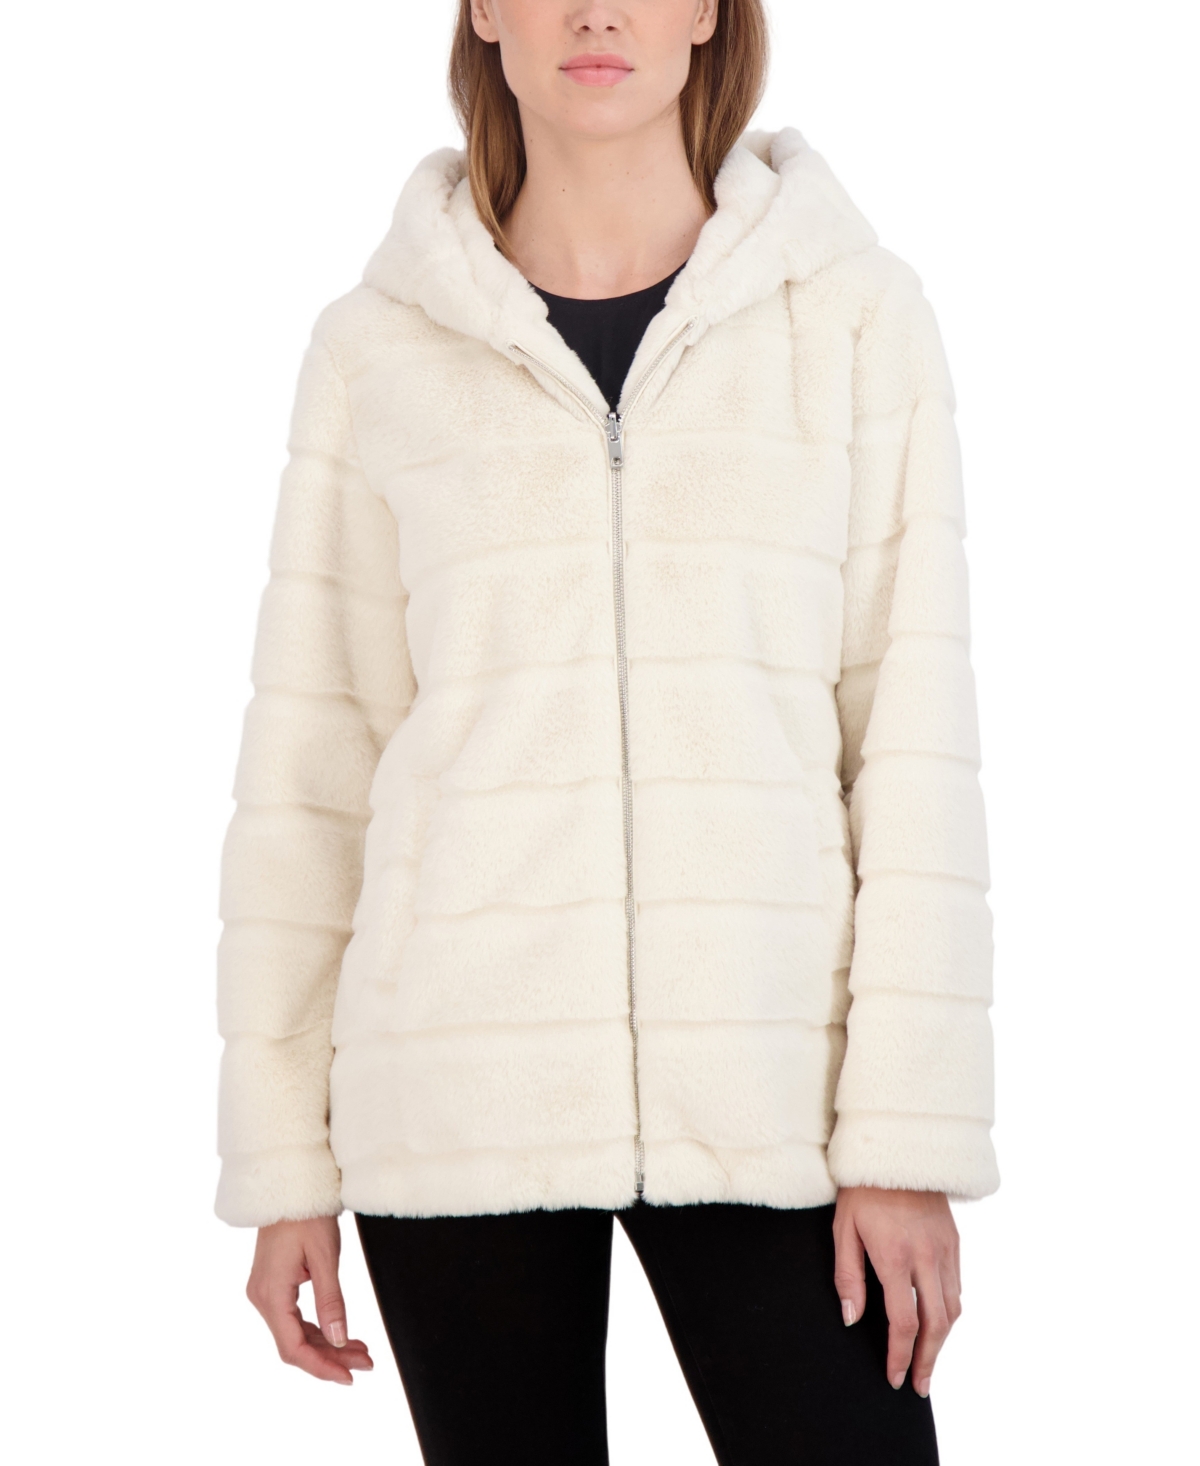 Women's Hooded Grooved Faux Fur Zip Front Coat - White